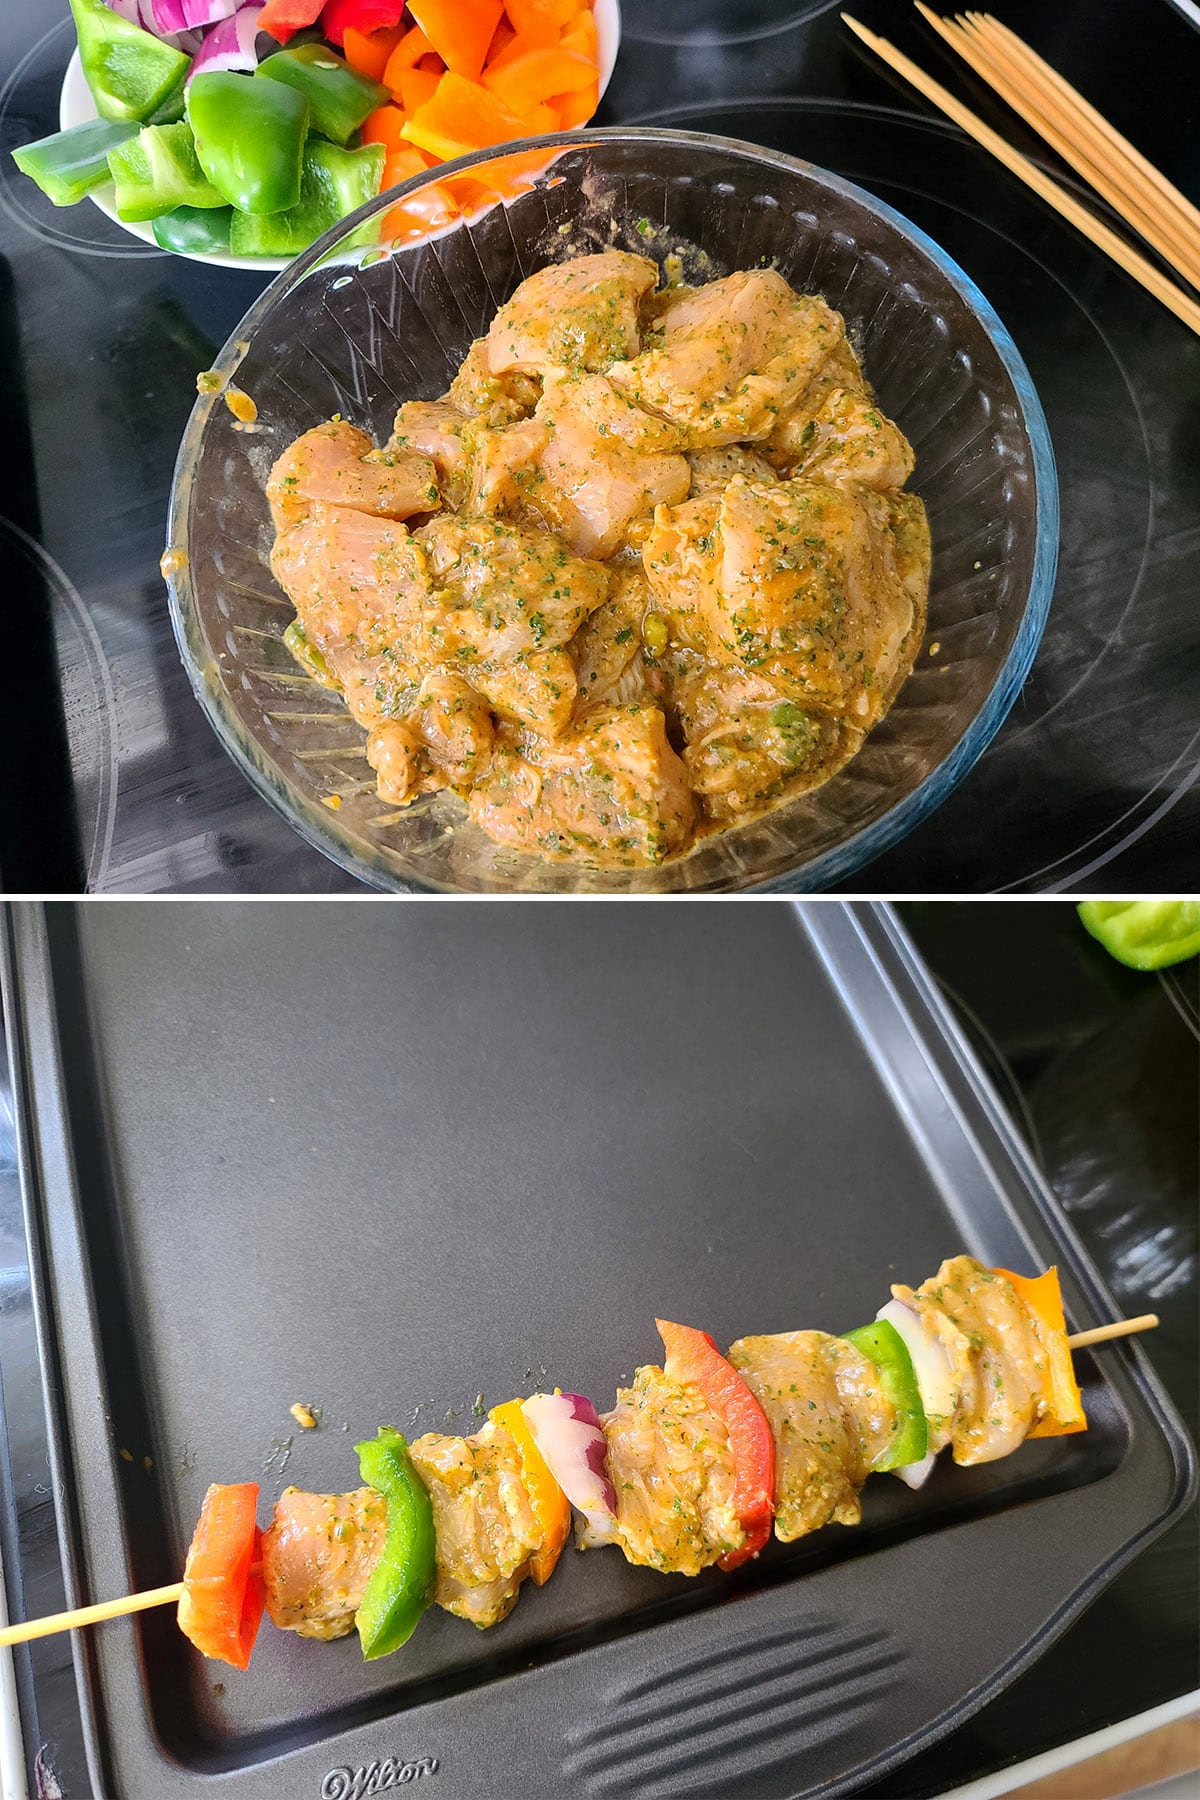 A 2 part image showing a bowl of marinated chicken and 1 assembled chicken kebab on a baking sheet.